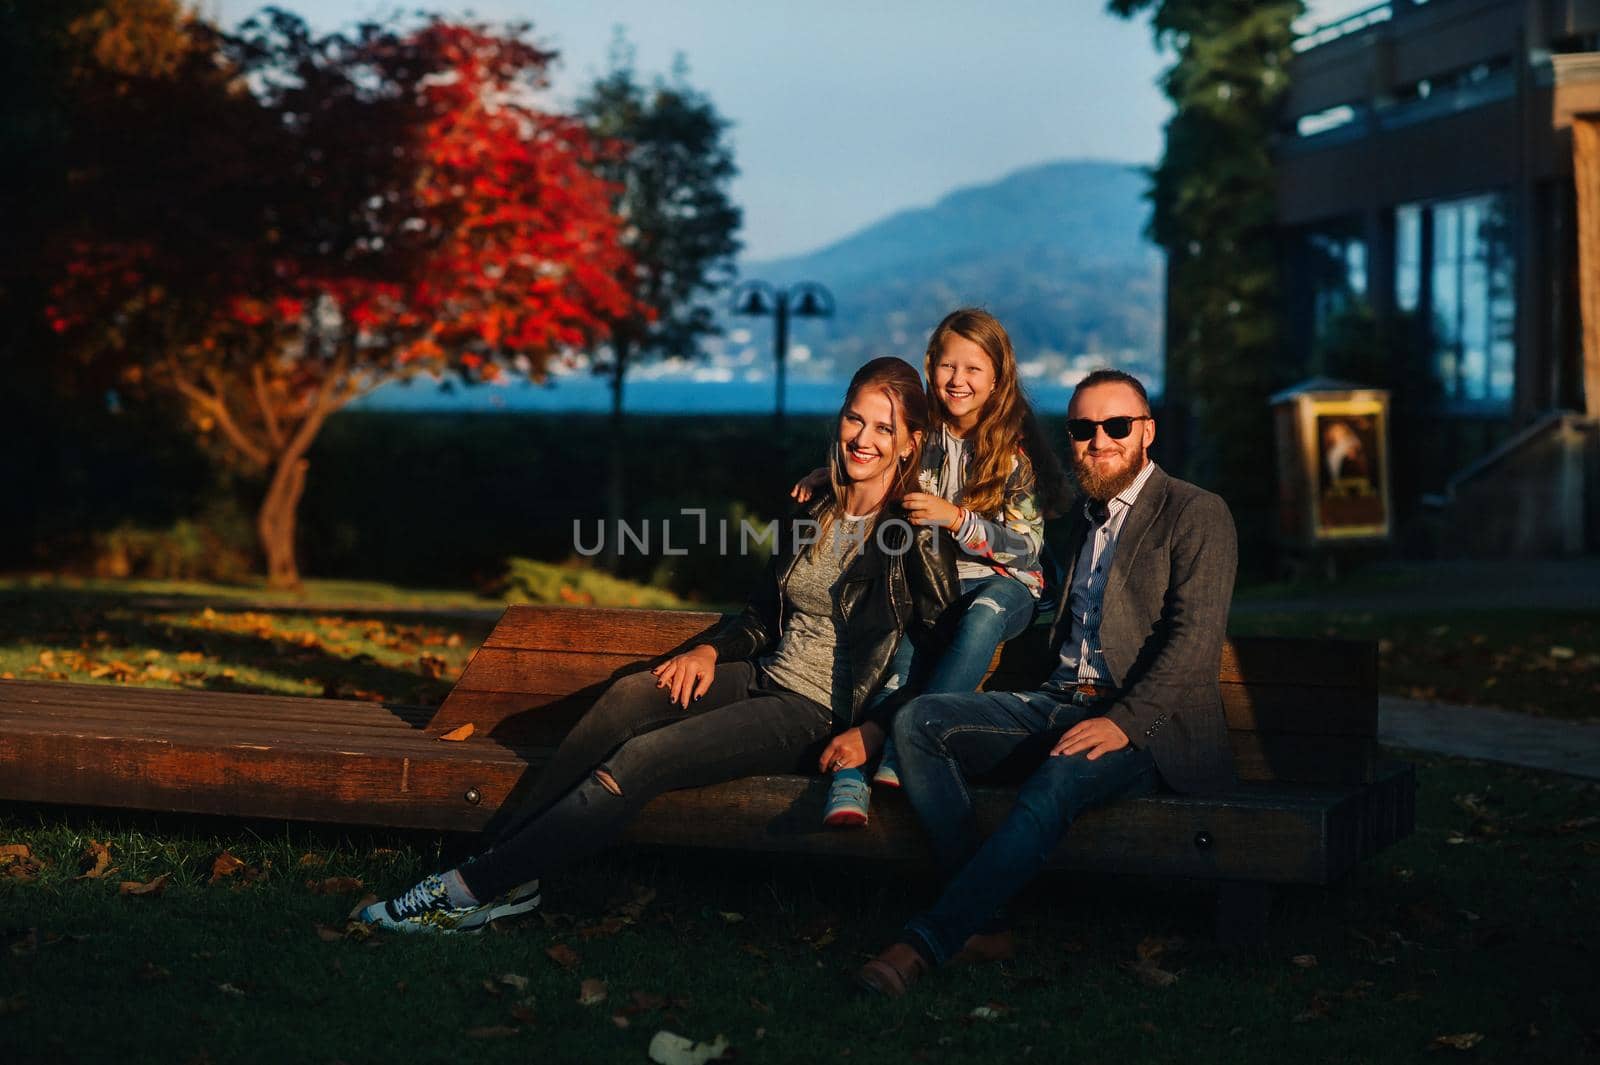 A happy family of three sits on a bench at a Sunny autumn sunset in Austria's Old town.A family poses in a small Austrian town against the backdrop of the Austrian Alps.Europe.Felden am see.